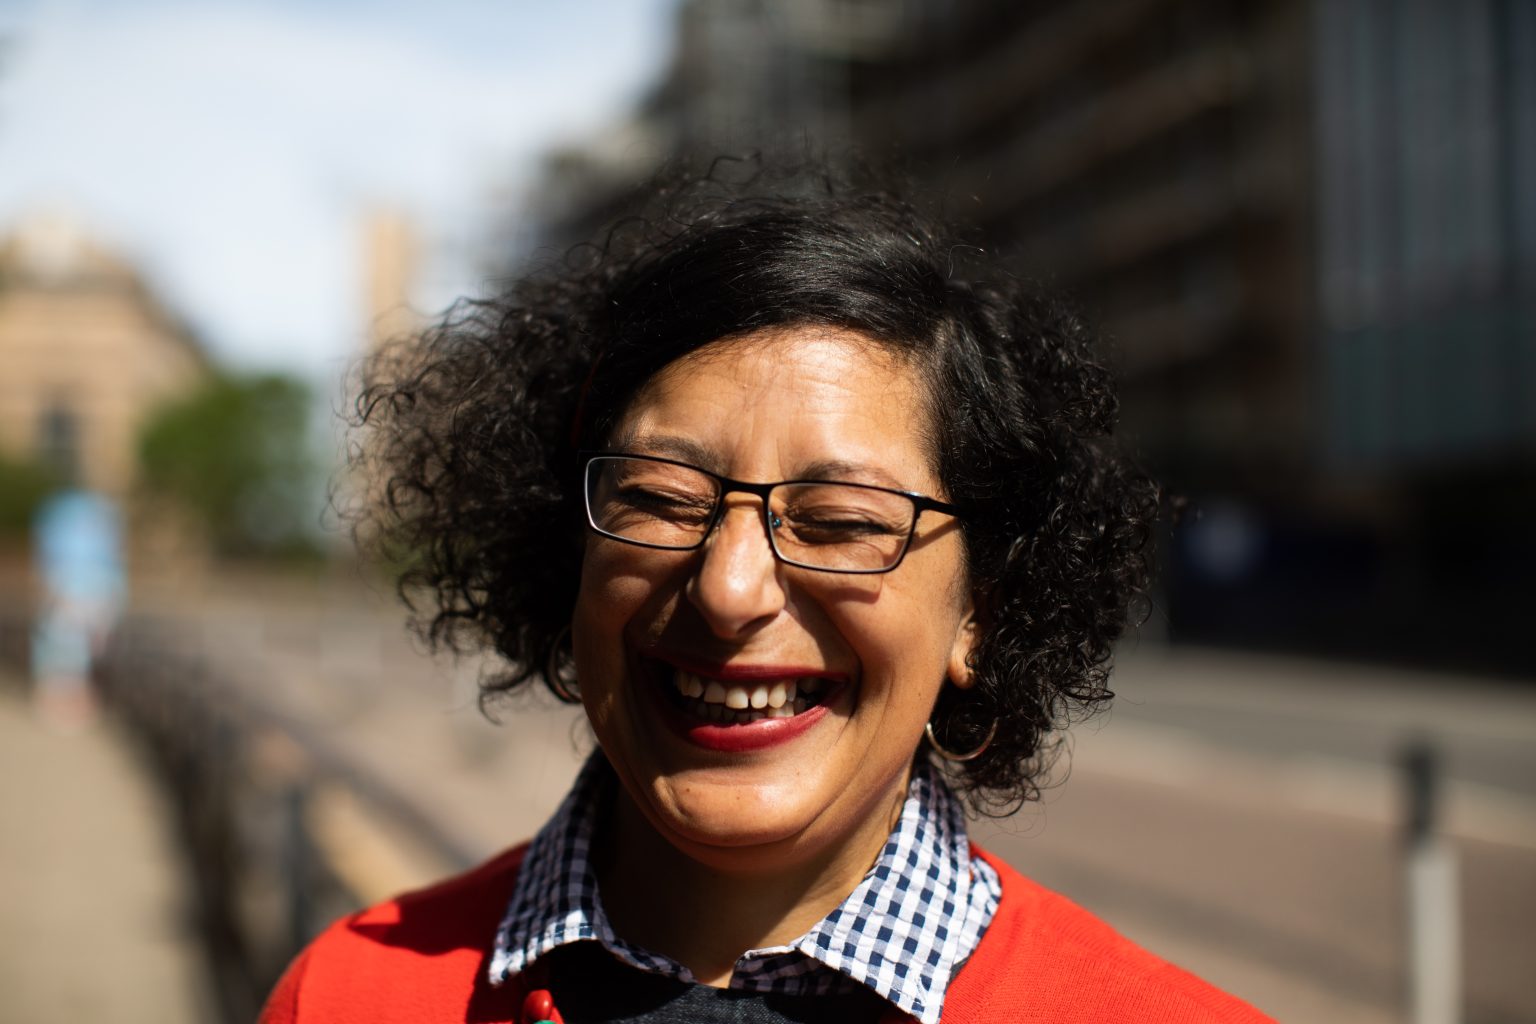 A close up of Leena Nammari standing on a city street. She has short curly hair and is wearing glasses and a collared shirt. She is facing the camera and smiling with her eyes closed.